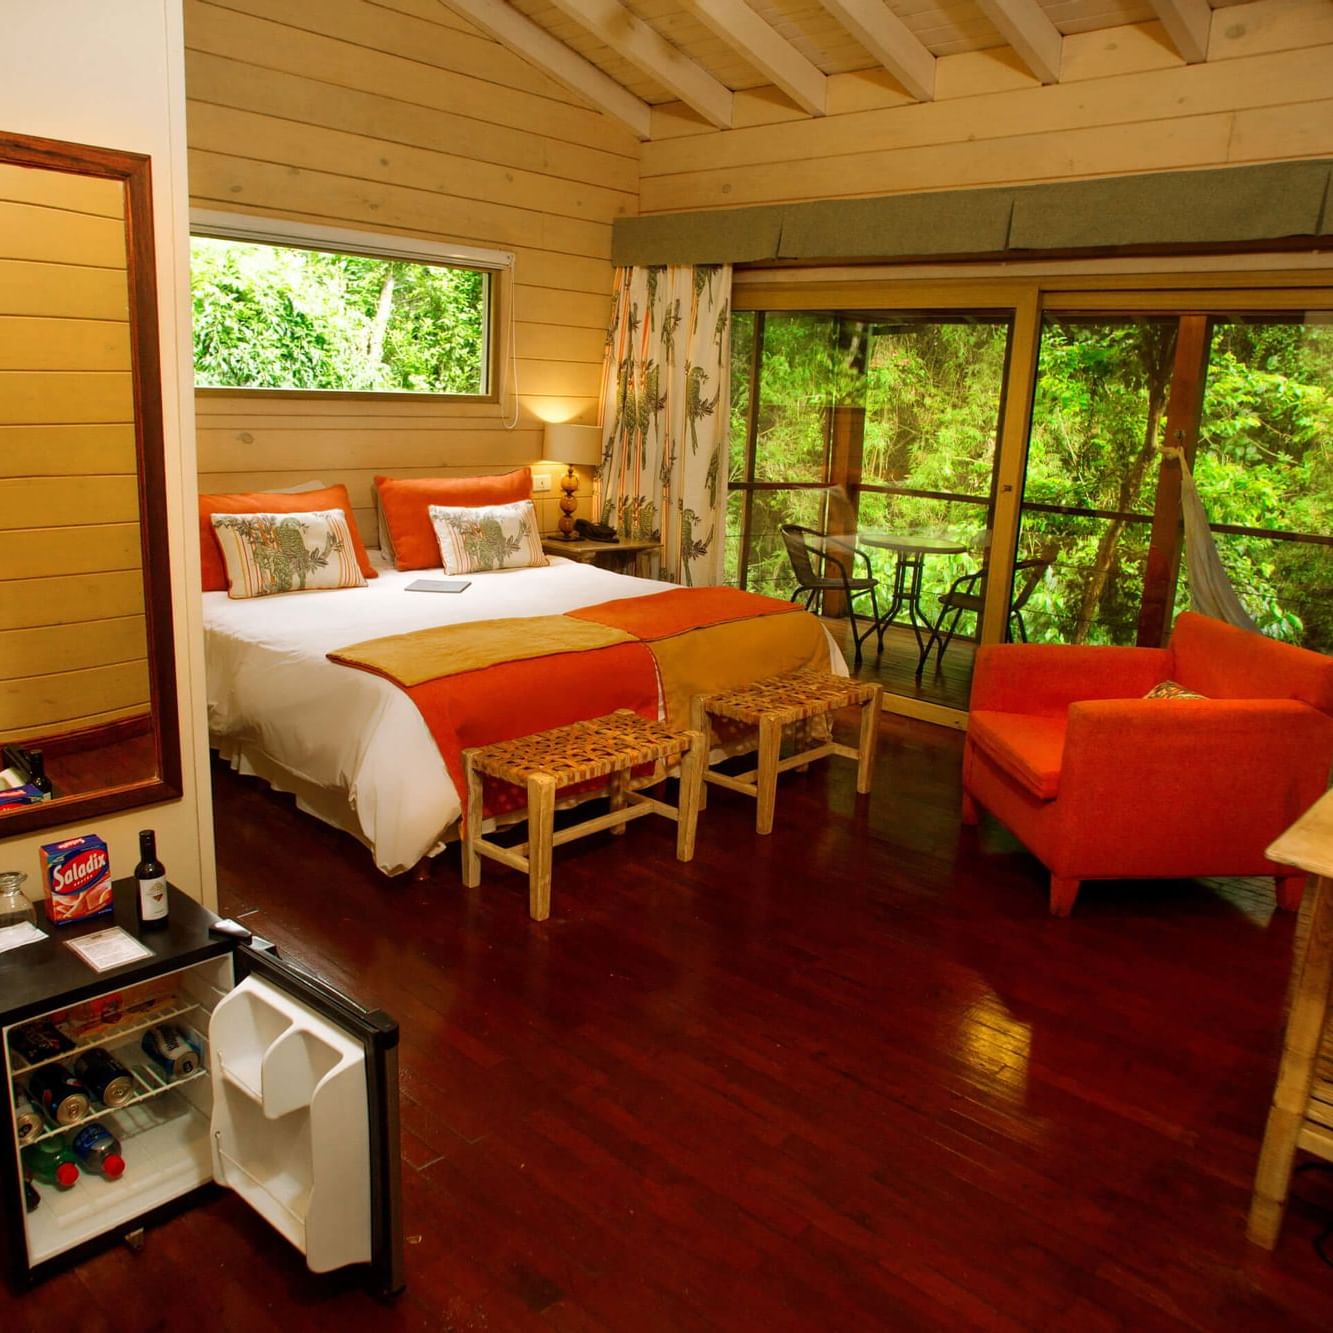 Bedroom & balcony lounge area in Jungle Room at DOT Hotels